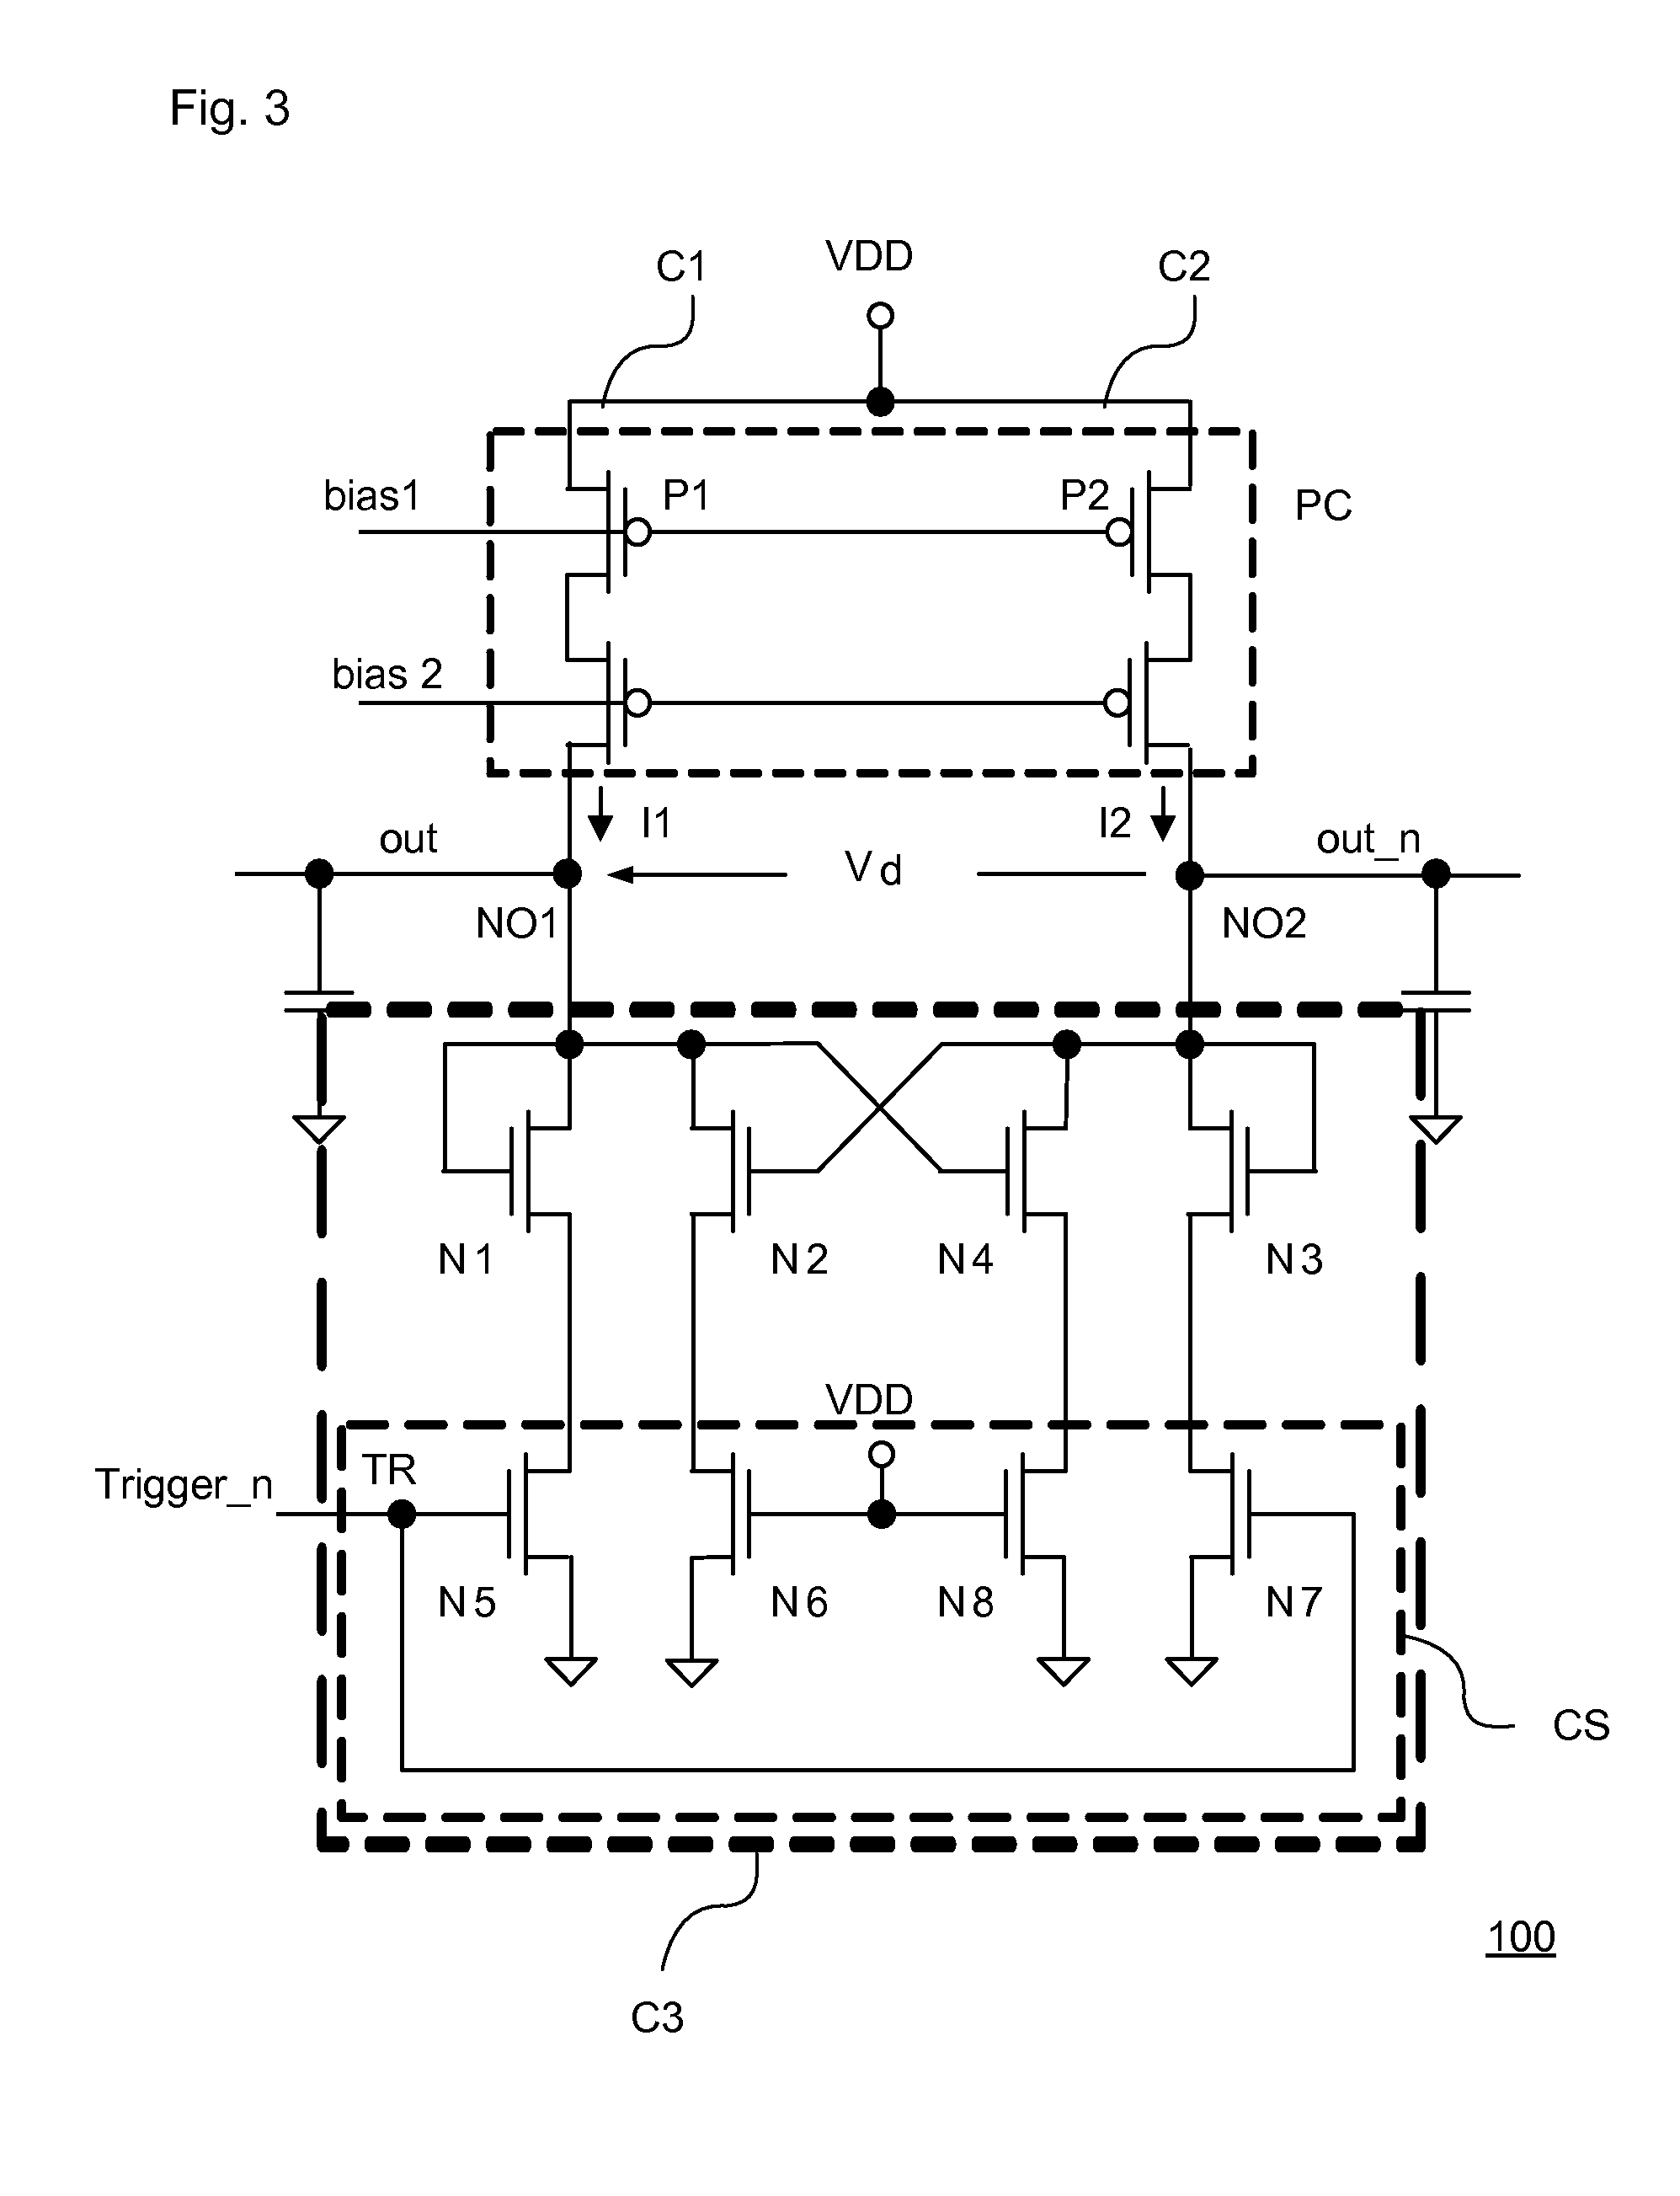 Identification circuit and method for generating an identification bit using physical unclonable functions